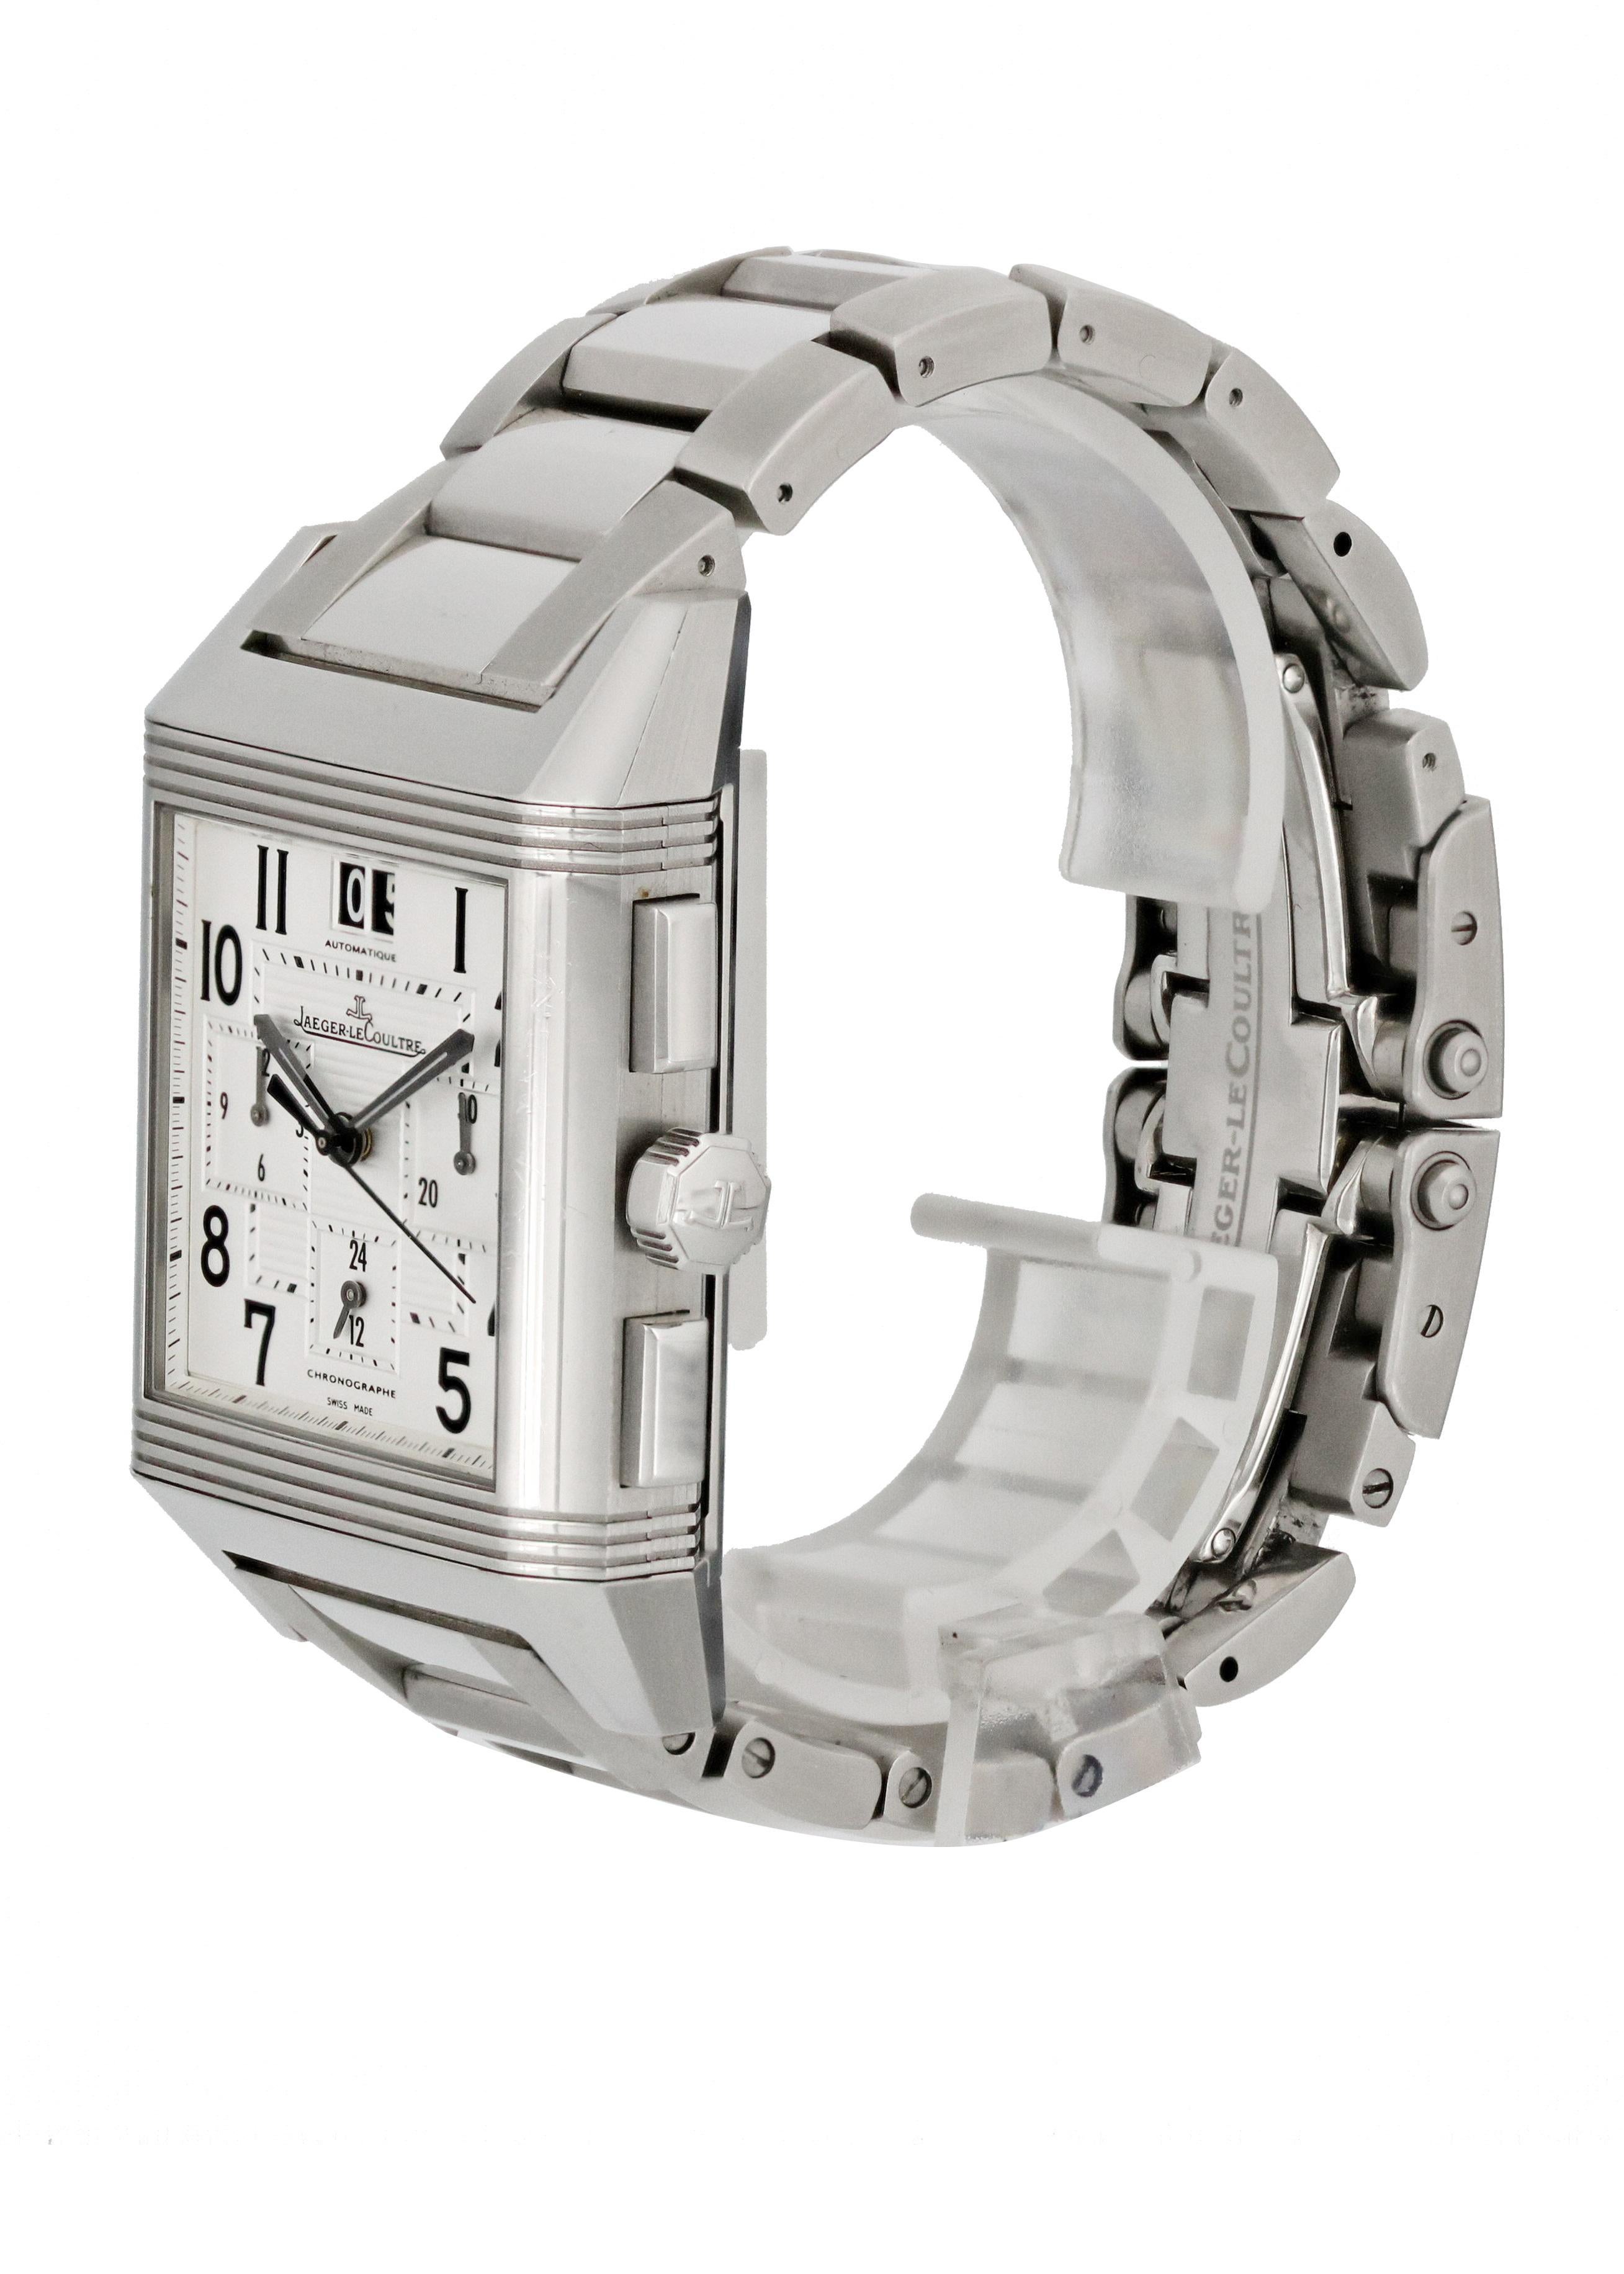 Jaeger LeCoultre Reverso Squadra 230.8.45 GMT Men Watch.34mm Stainless Steel case. Stainless Steel Stationary bezel. Silver dial with Luminous Steel hands and Arabic numeral hour markers. Minute markers on the inner dial. Date display at the 12